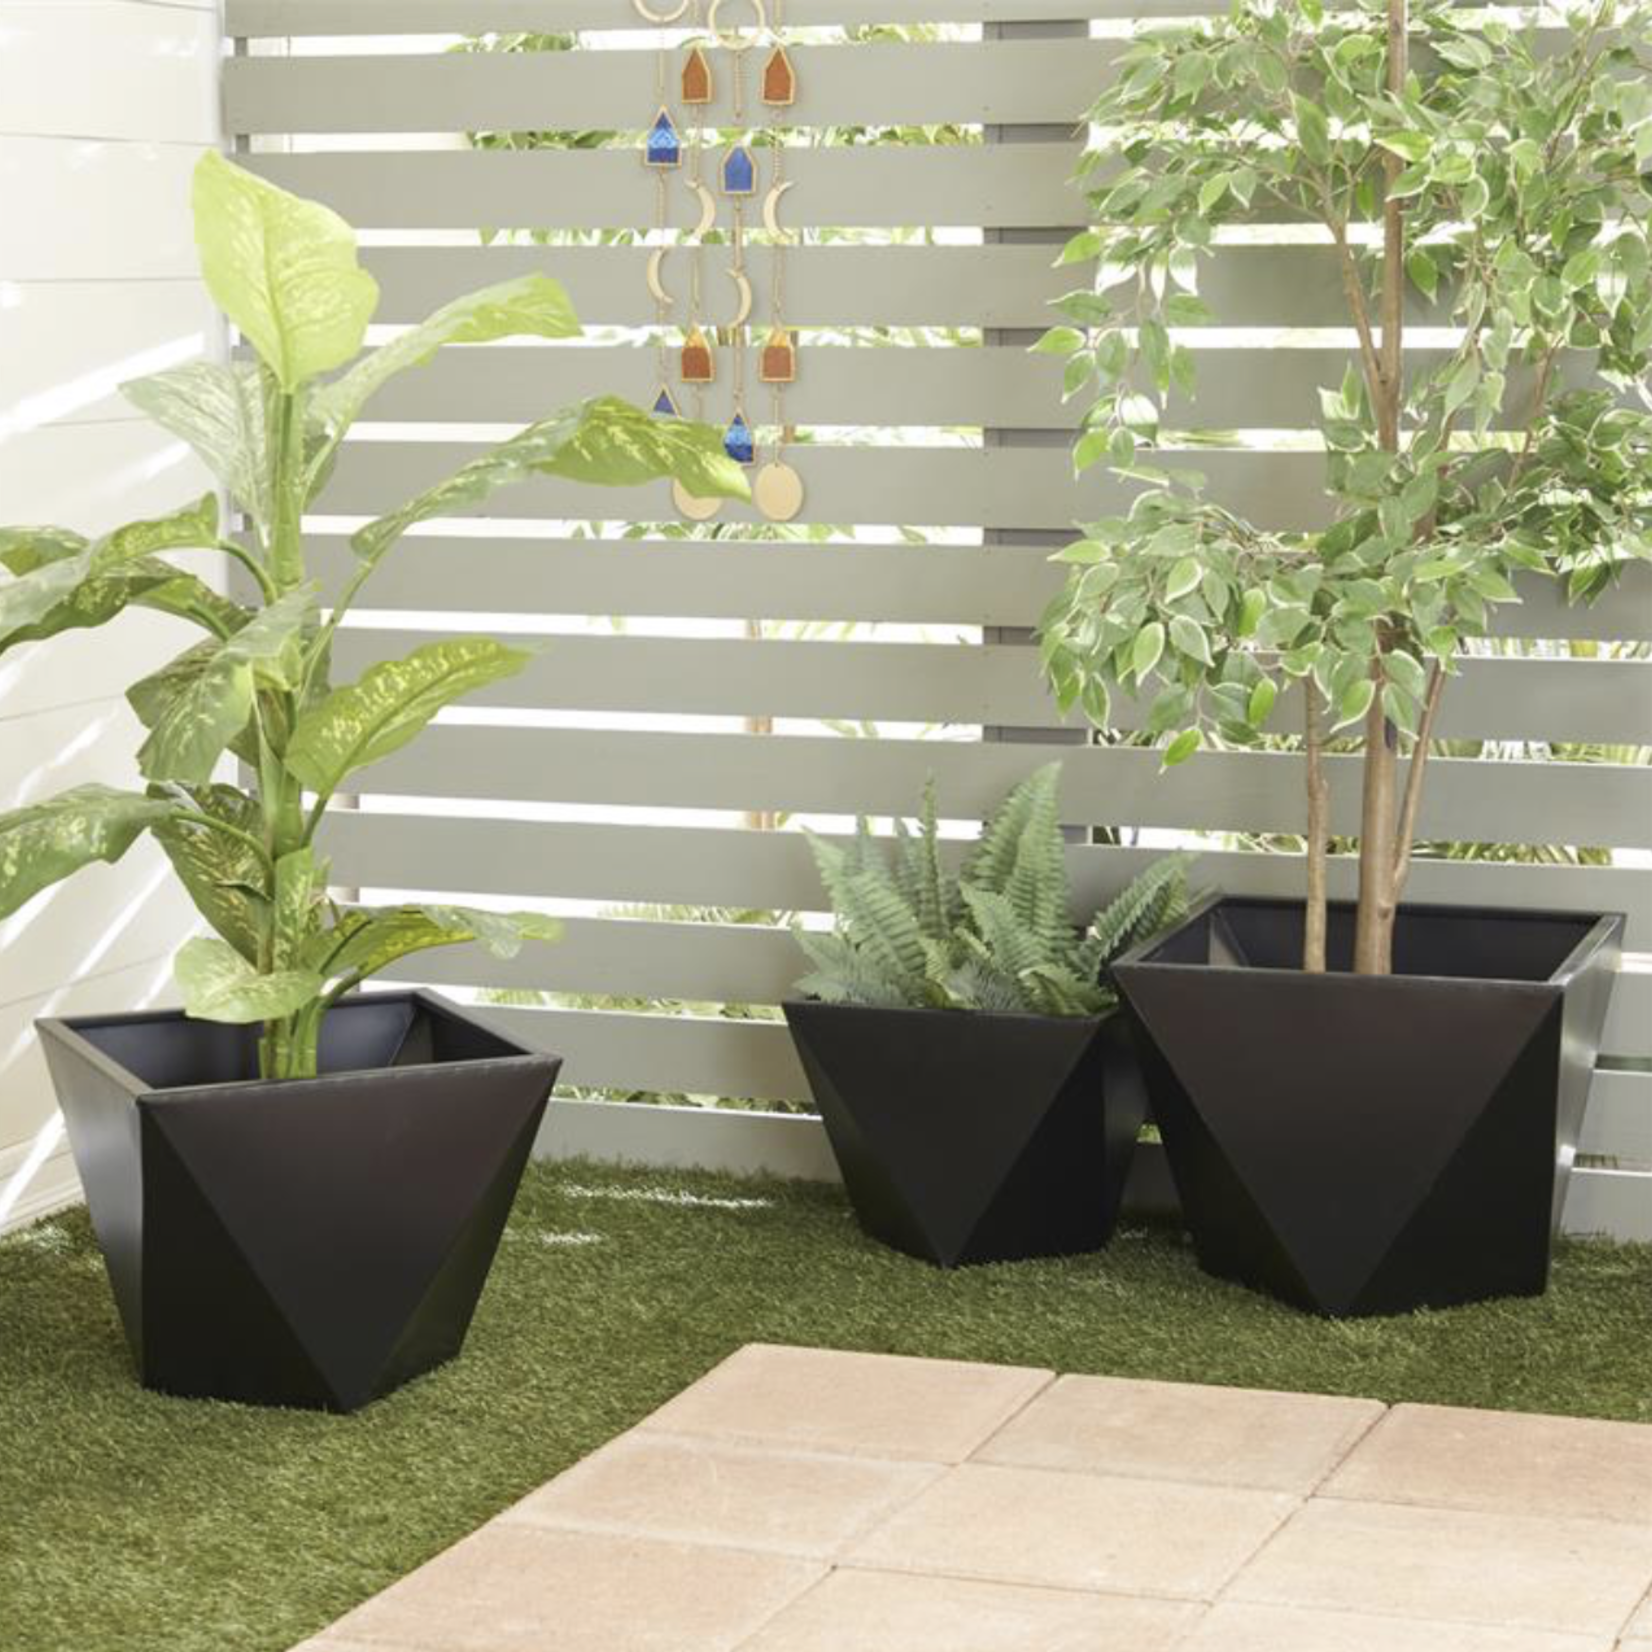 11.25”h x 14.5” SMALL BLACK METAL GEOMETRICAL INDOOR OUTDOOR PLANTER (NOT WATER TIGHT, PRICE PER SIZE, BOX HAS ASSORTMENT)